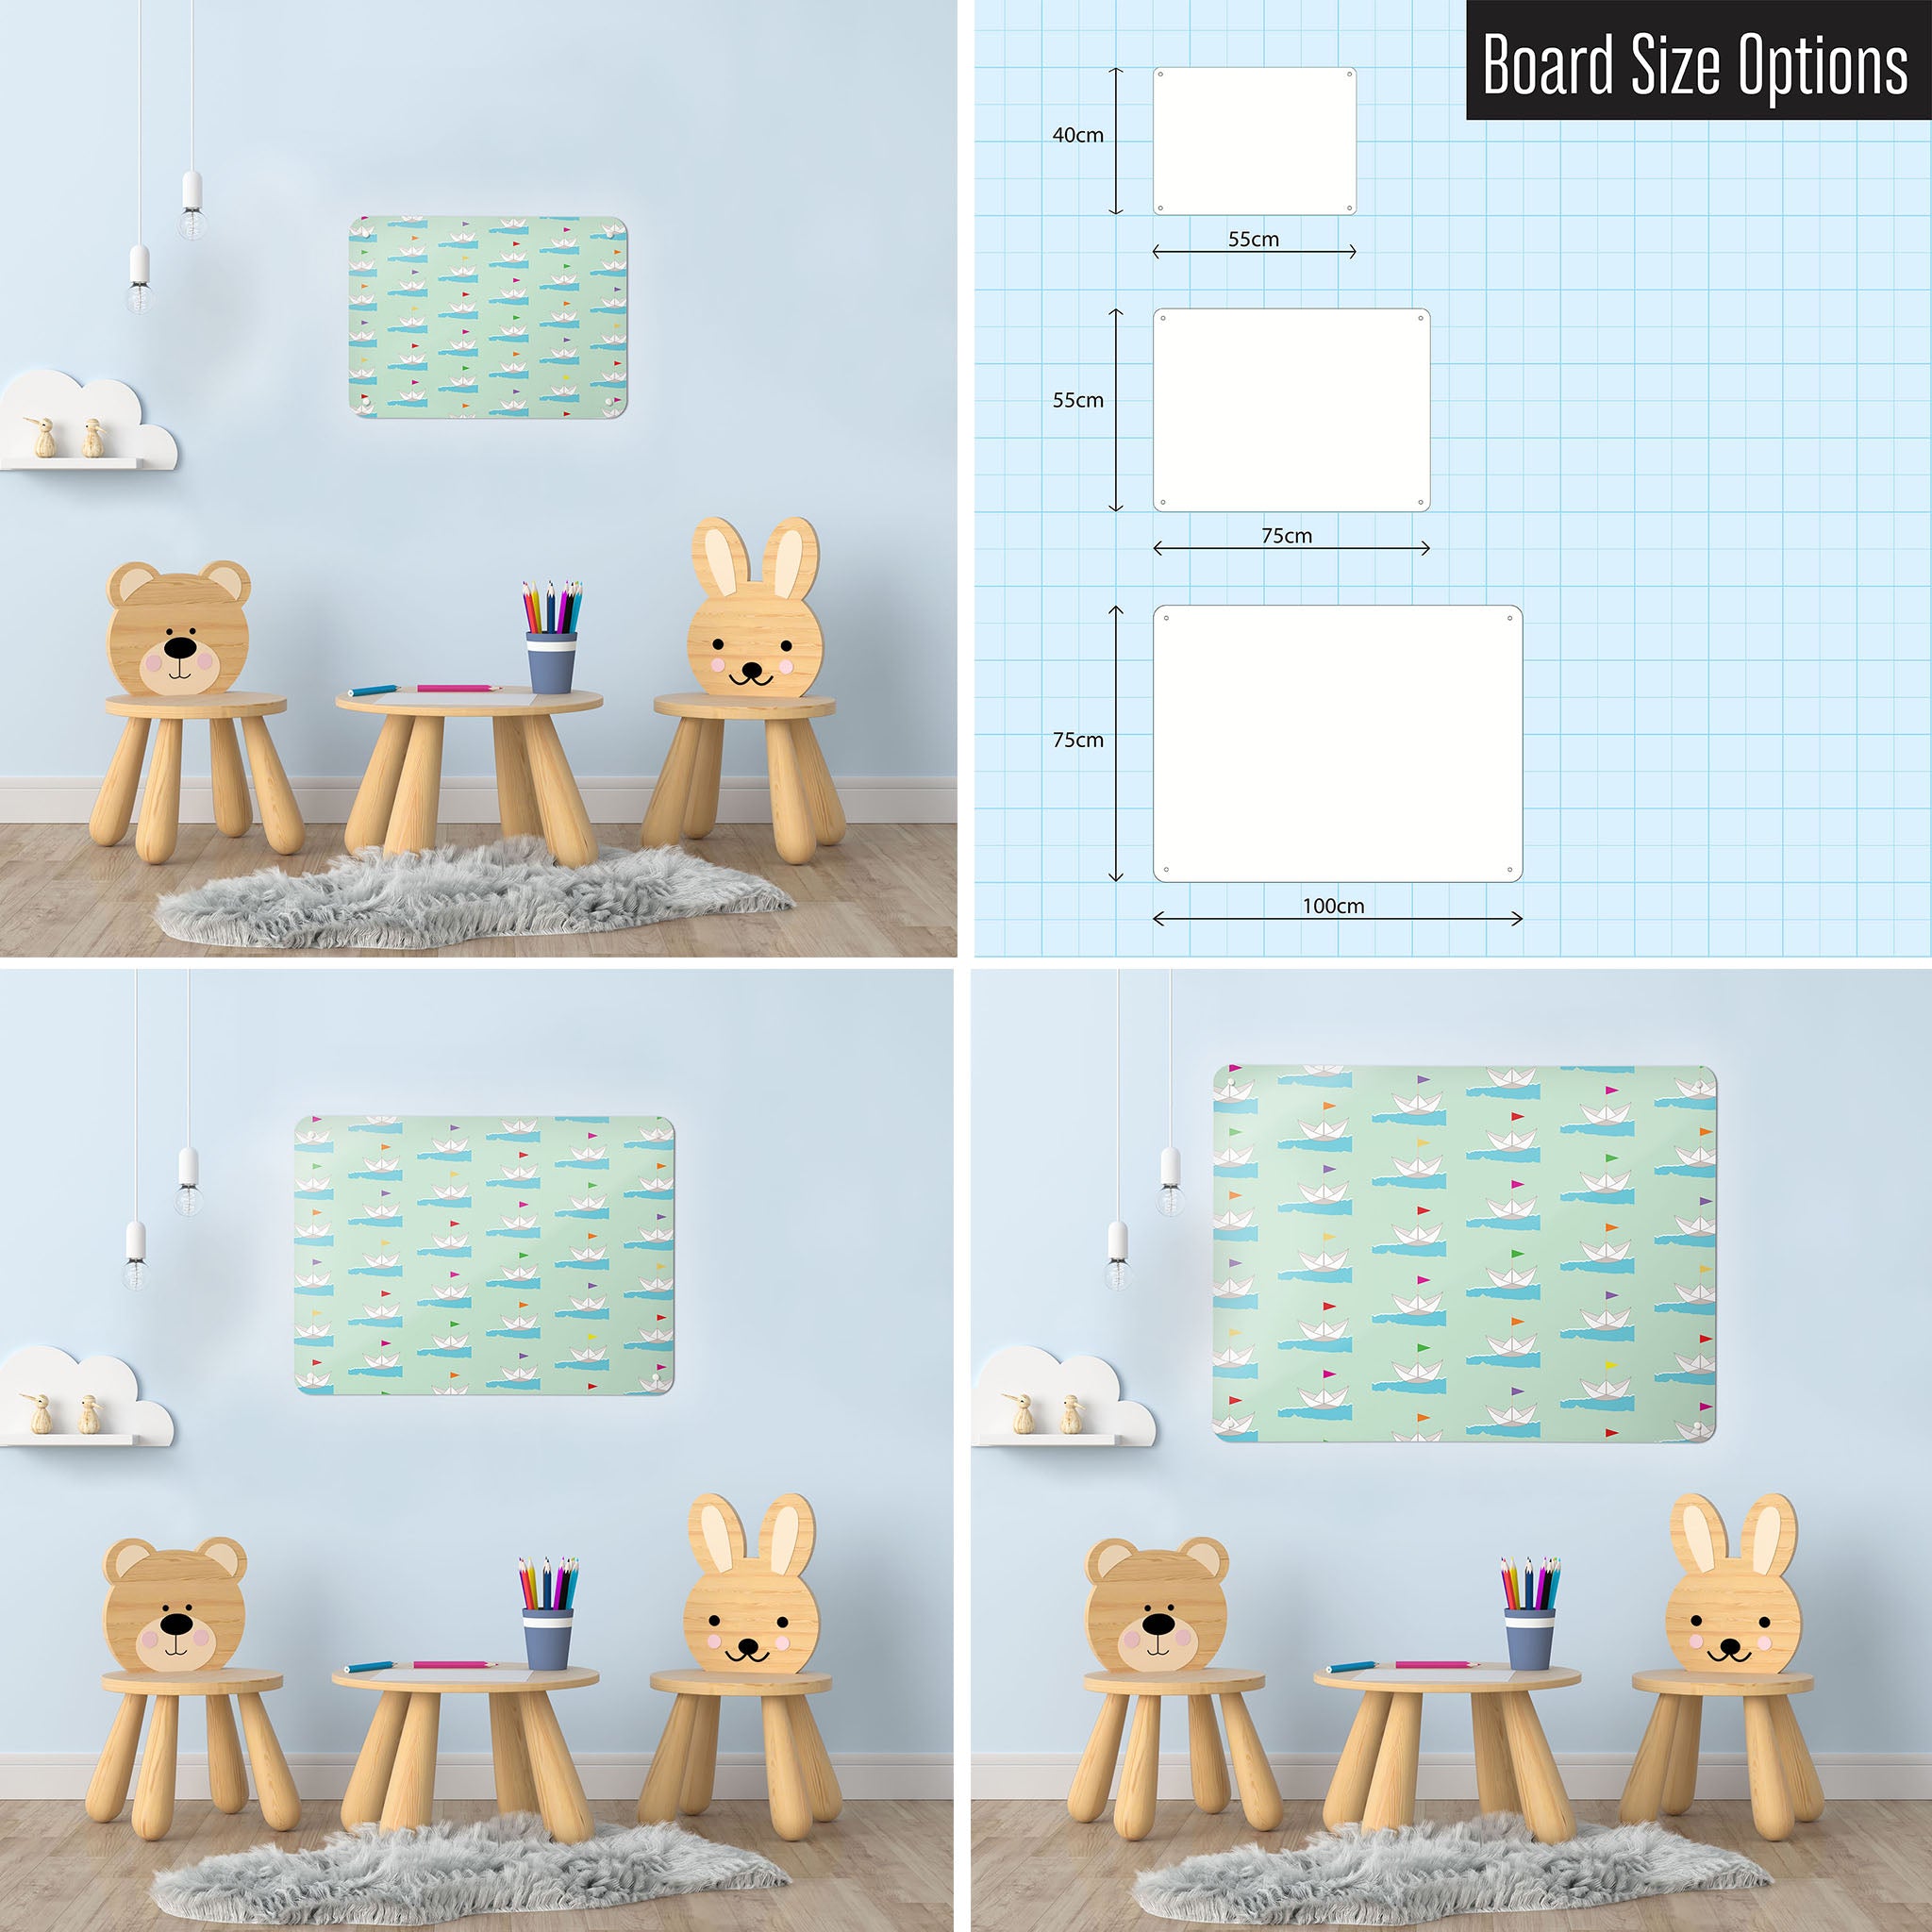 Three photographs of a workspace interior and a diagram to show size comparisons of a paper boats design magnetic notice board